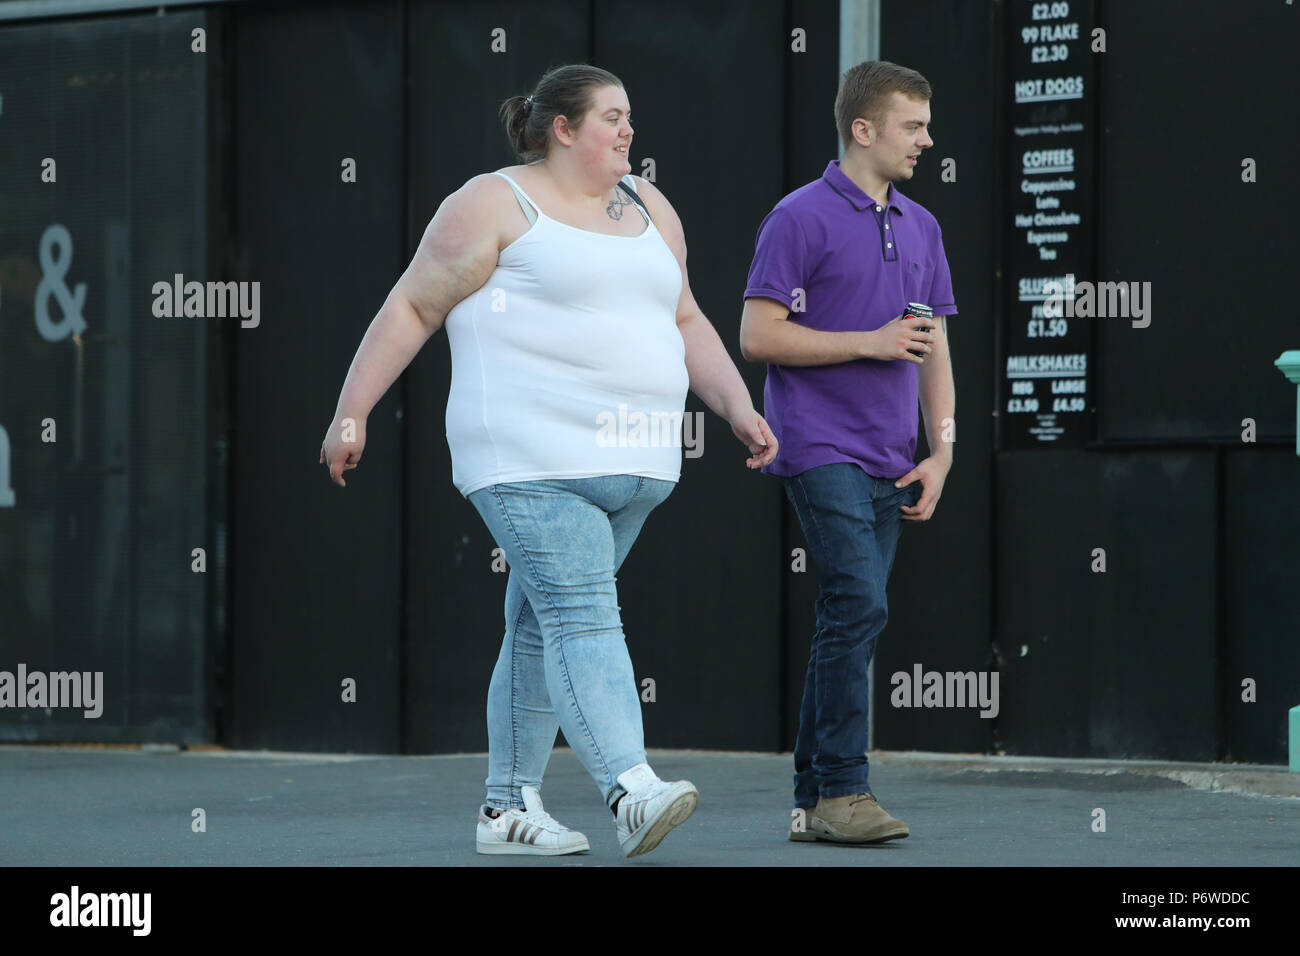 An Overweight Woman Walking With A Thin Man Stock Photo Alamy